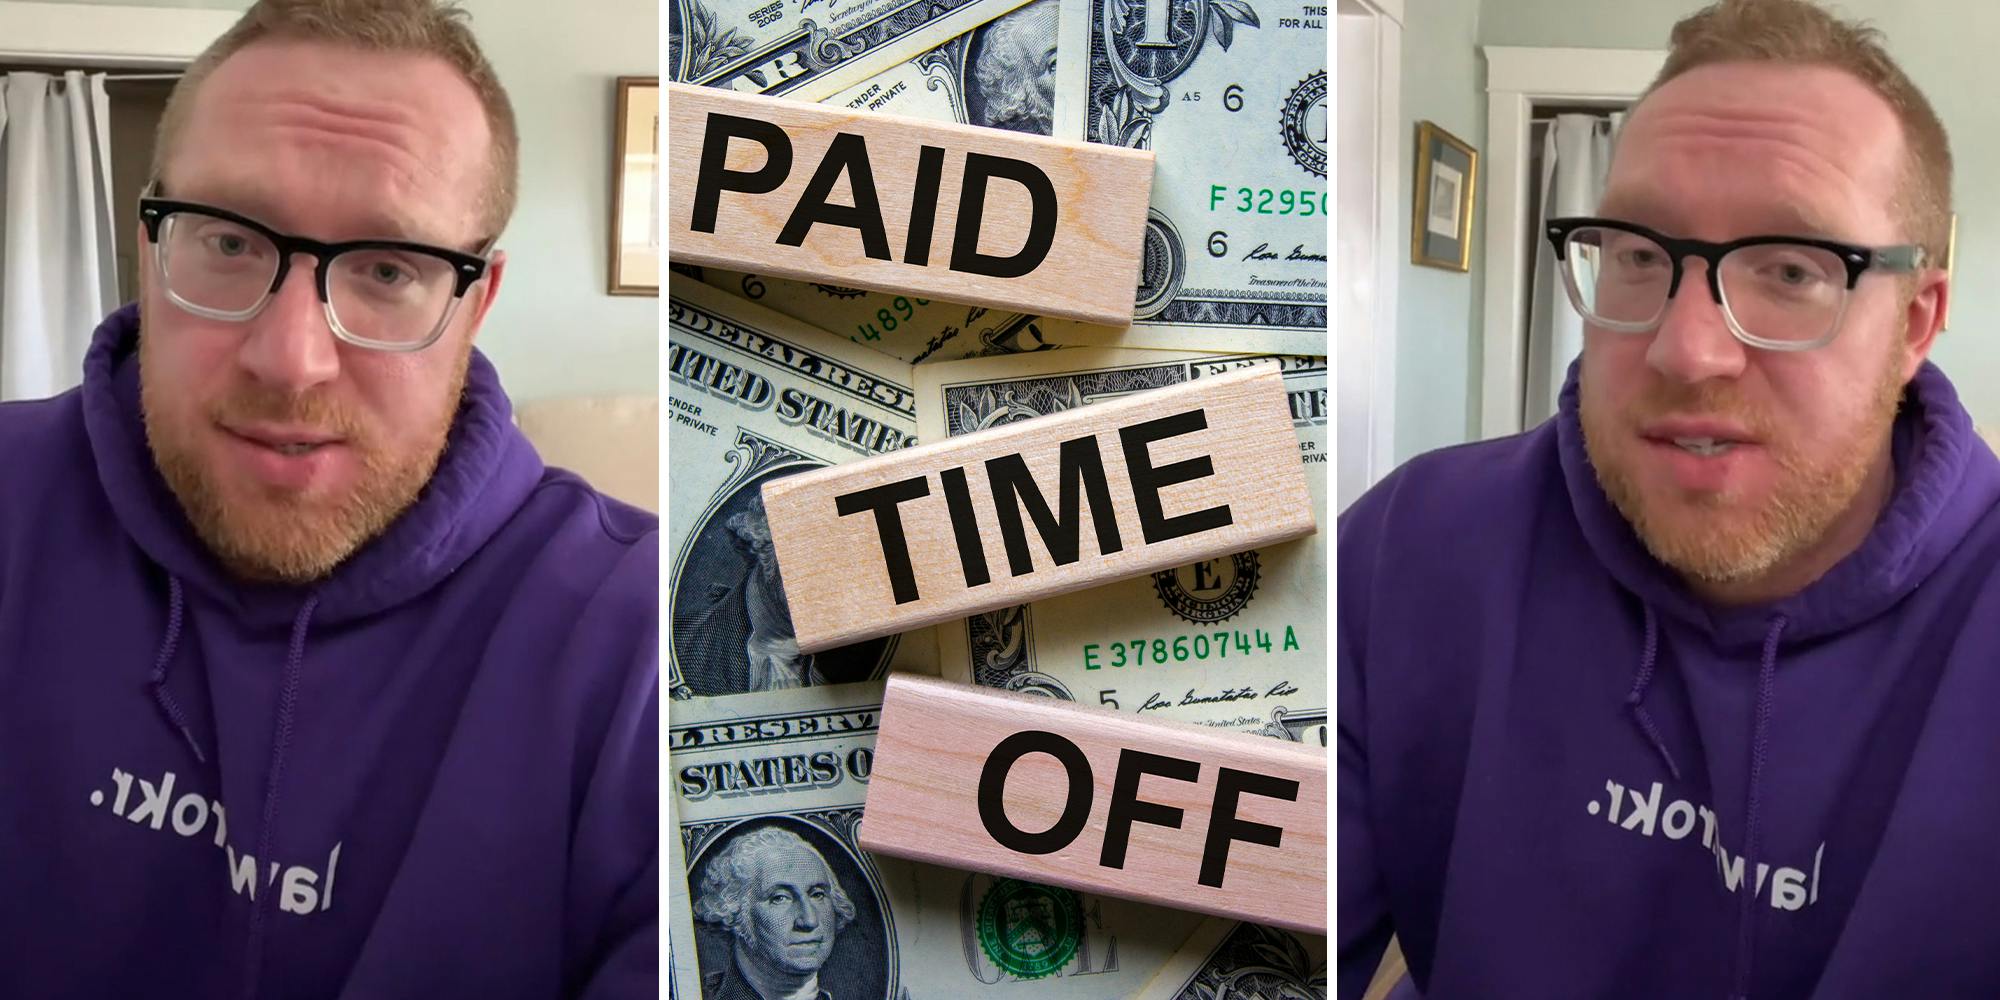 ‘Happens all the time with night shift’: Expert says look out for this PTO trick that’s actually your boss stealing money from your paycheck